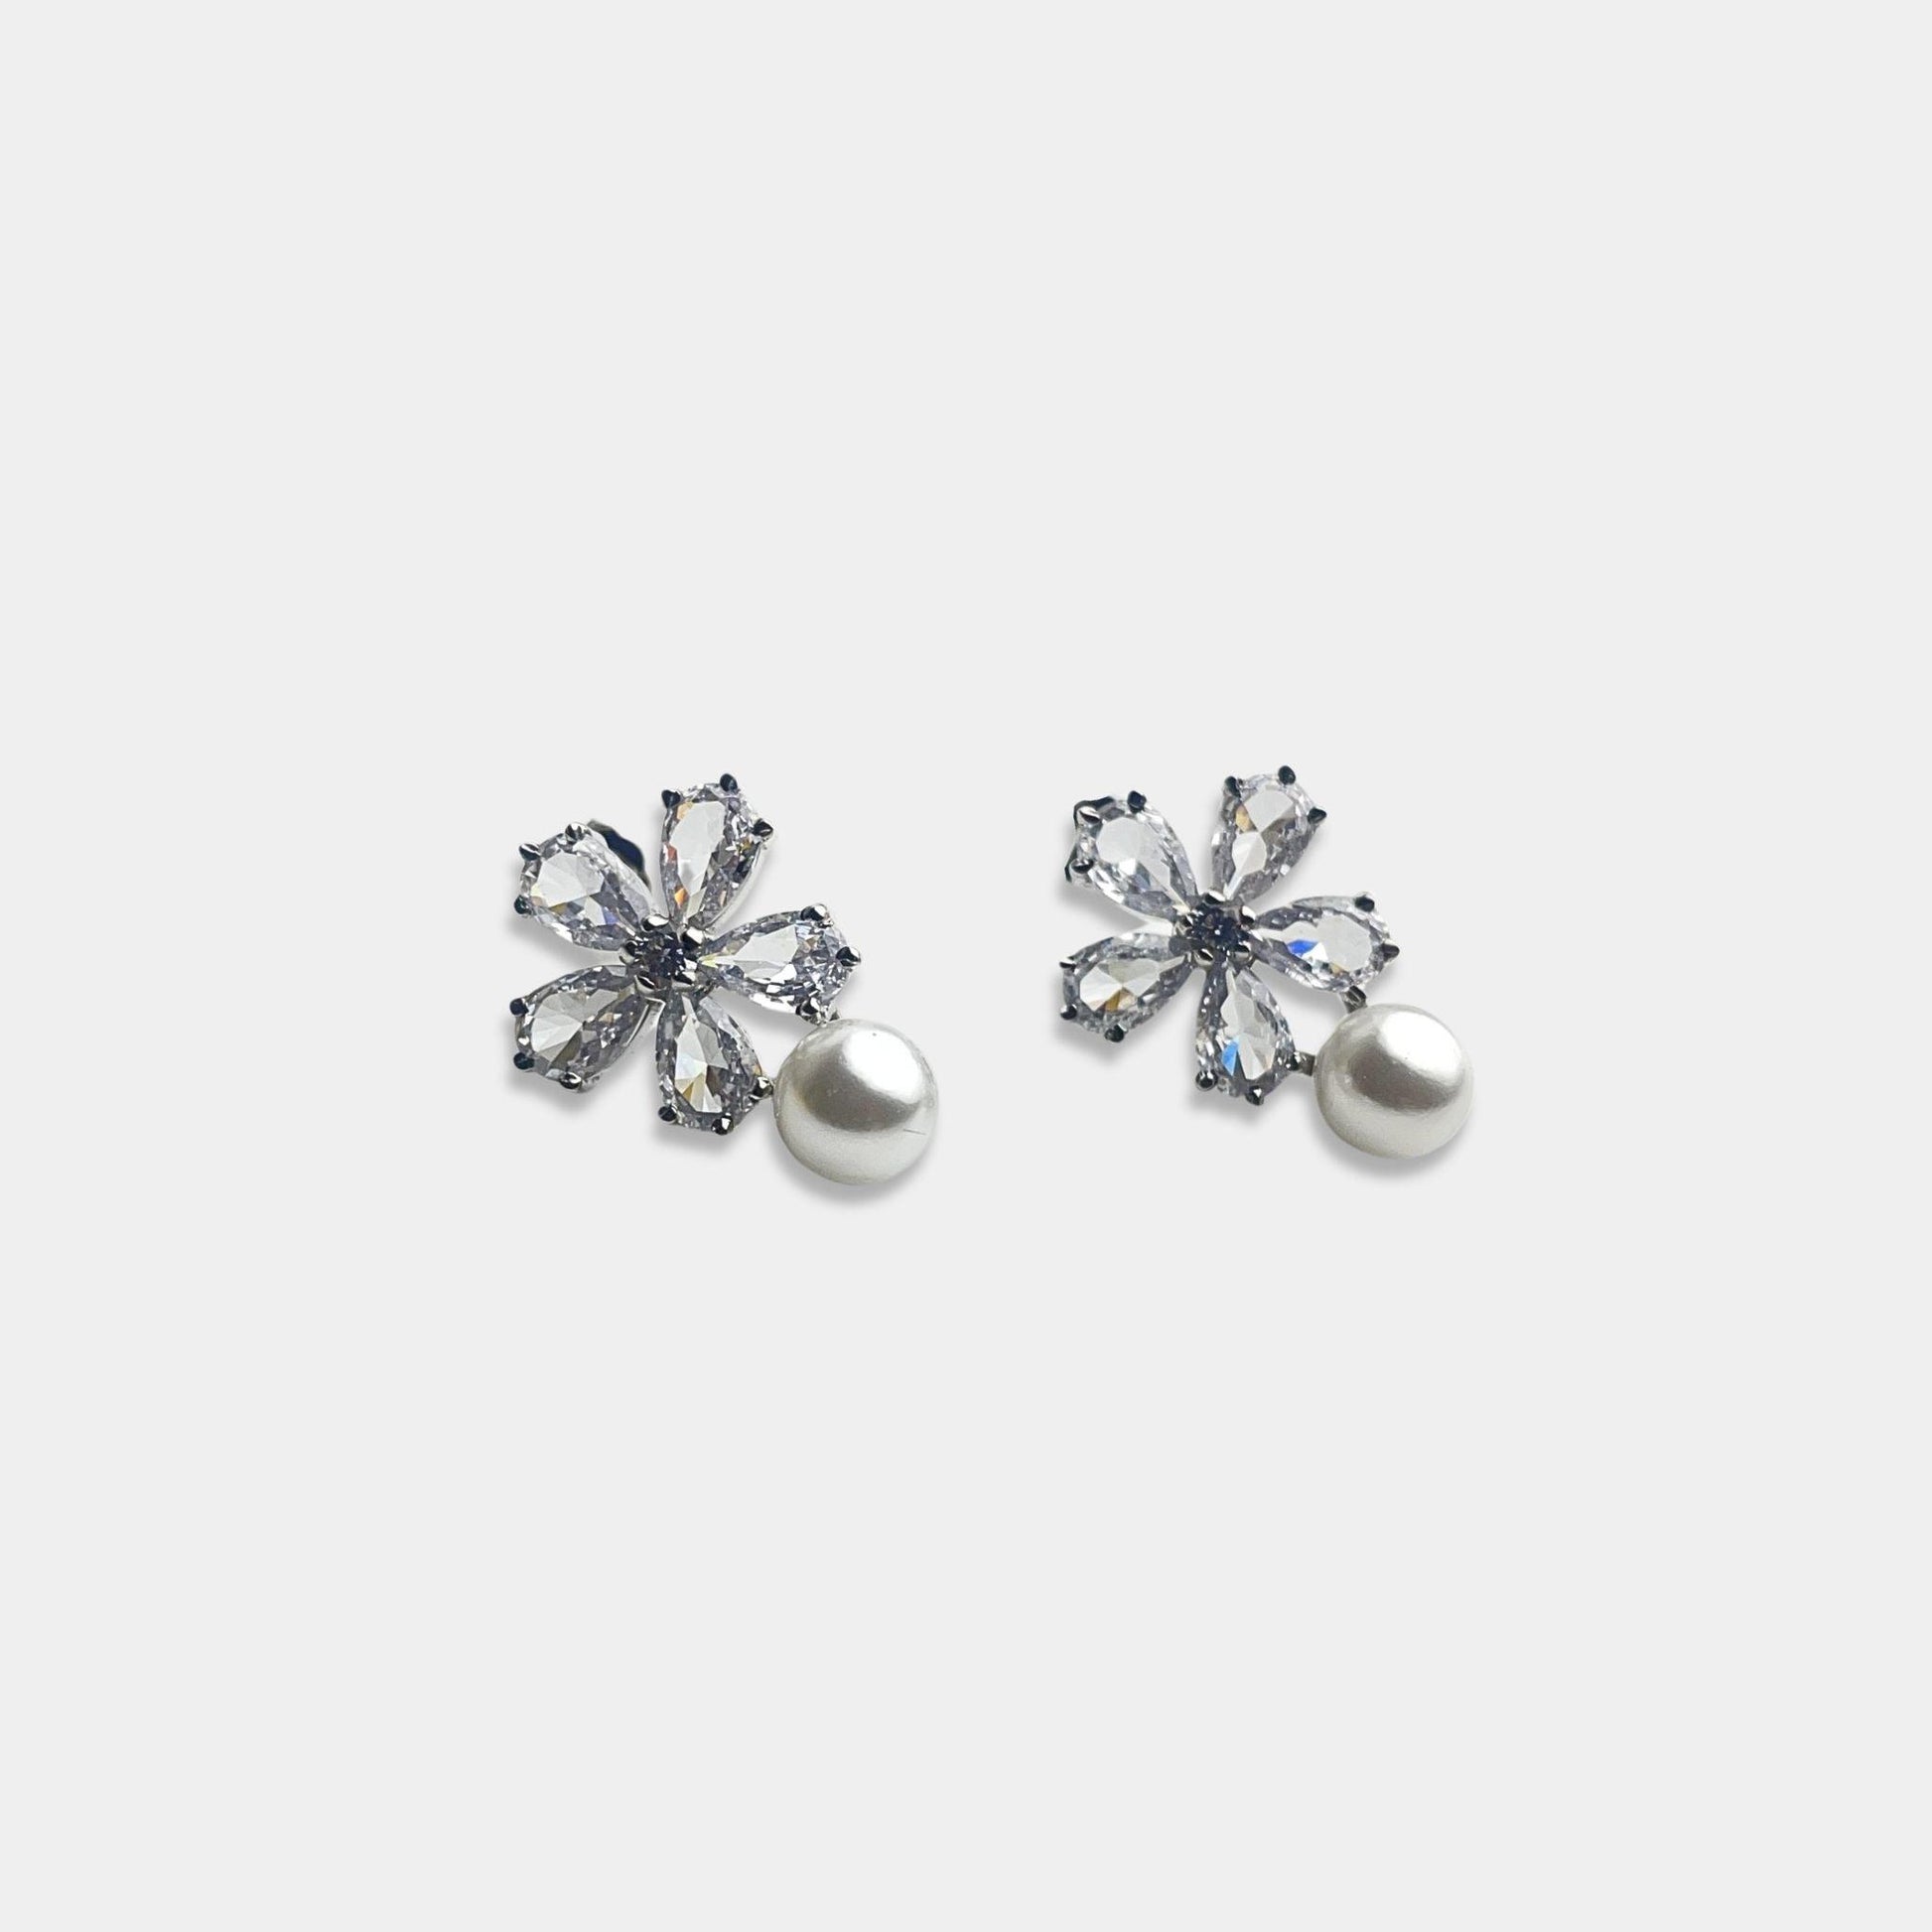 Elevate your style with our exquisite sterling silver Star Earrings inspired by the silver Nebula Floral.